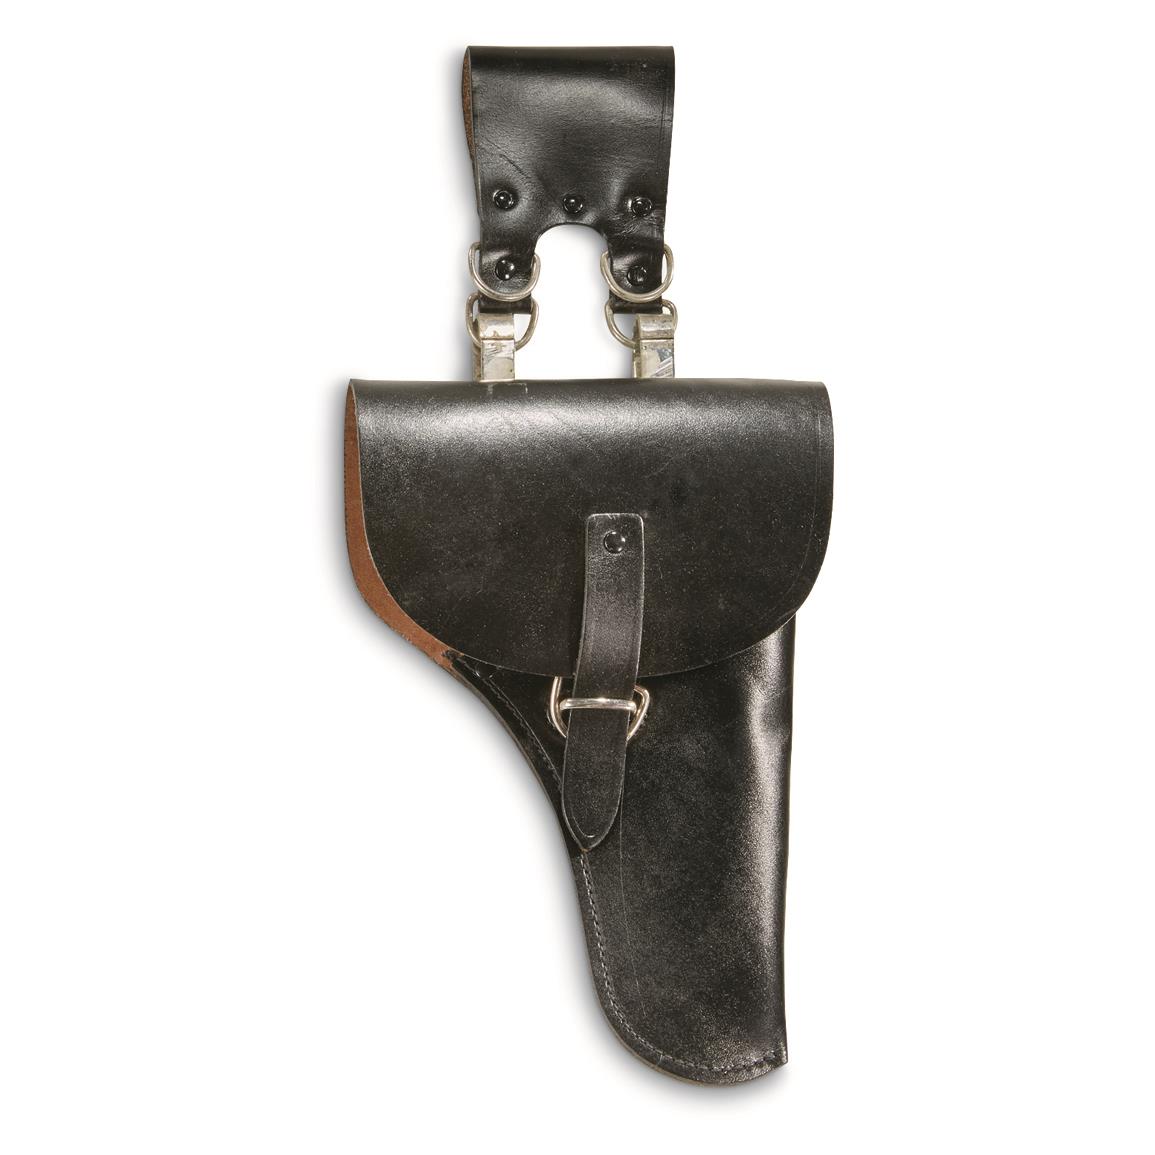 Italian Military Surplus Large Frame Leather Holster with Belt Clip, New